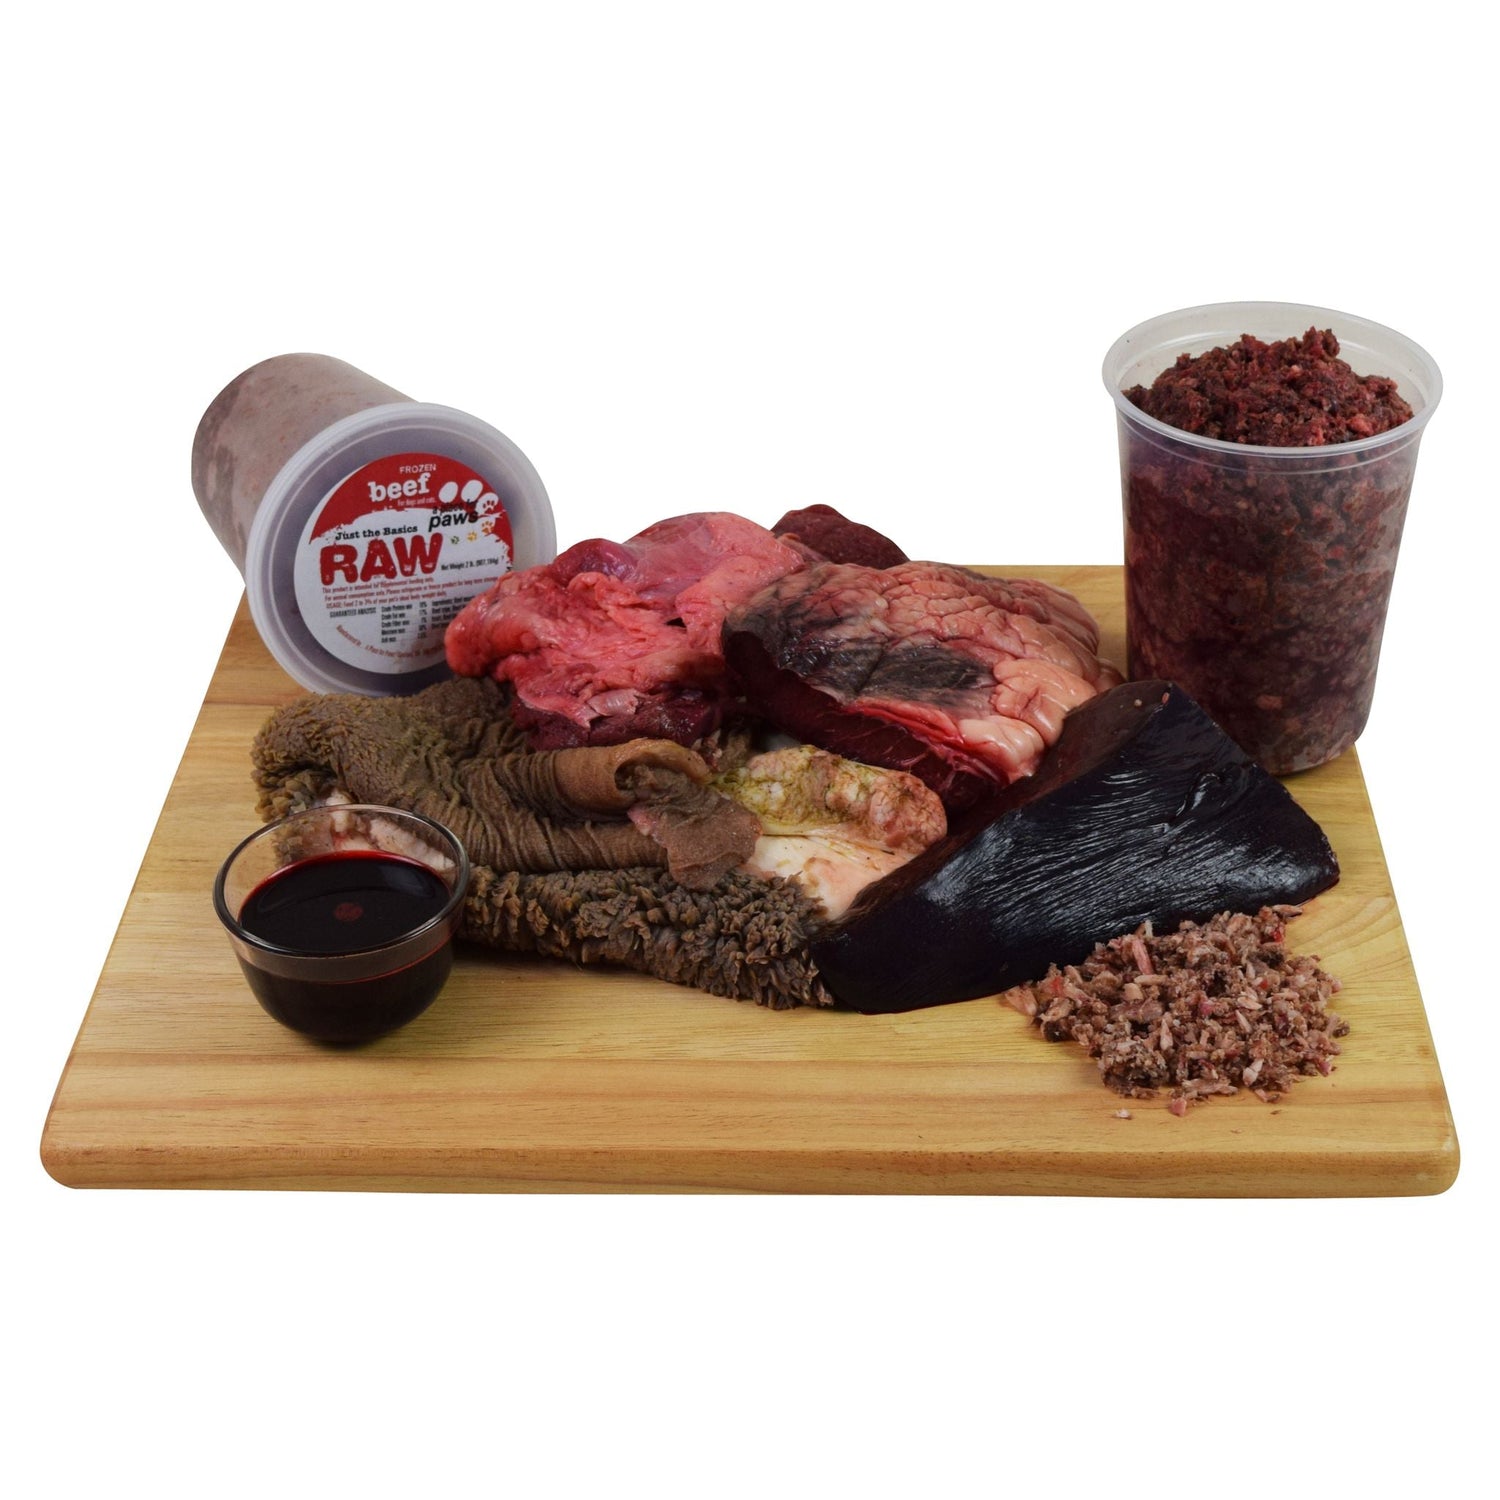 Beef Tripe, Beef Heart, Beef Tongue, Beef Liver, Egg Shells, Raw Food, 45 pound box, pet food